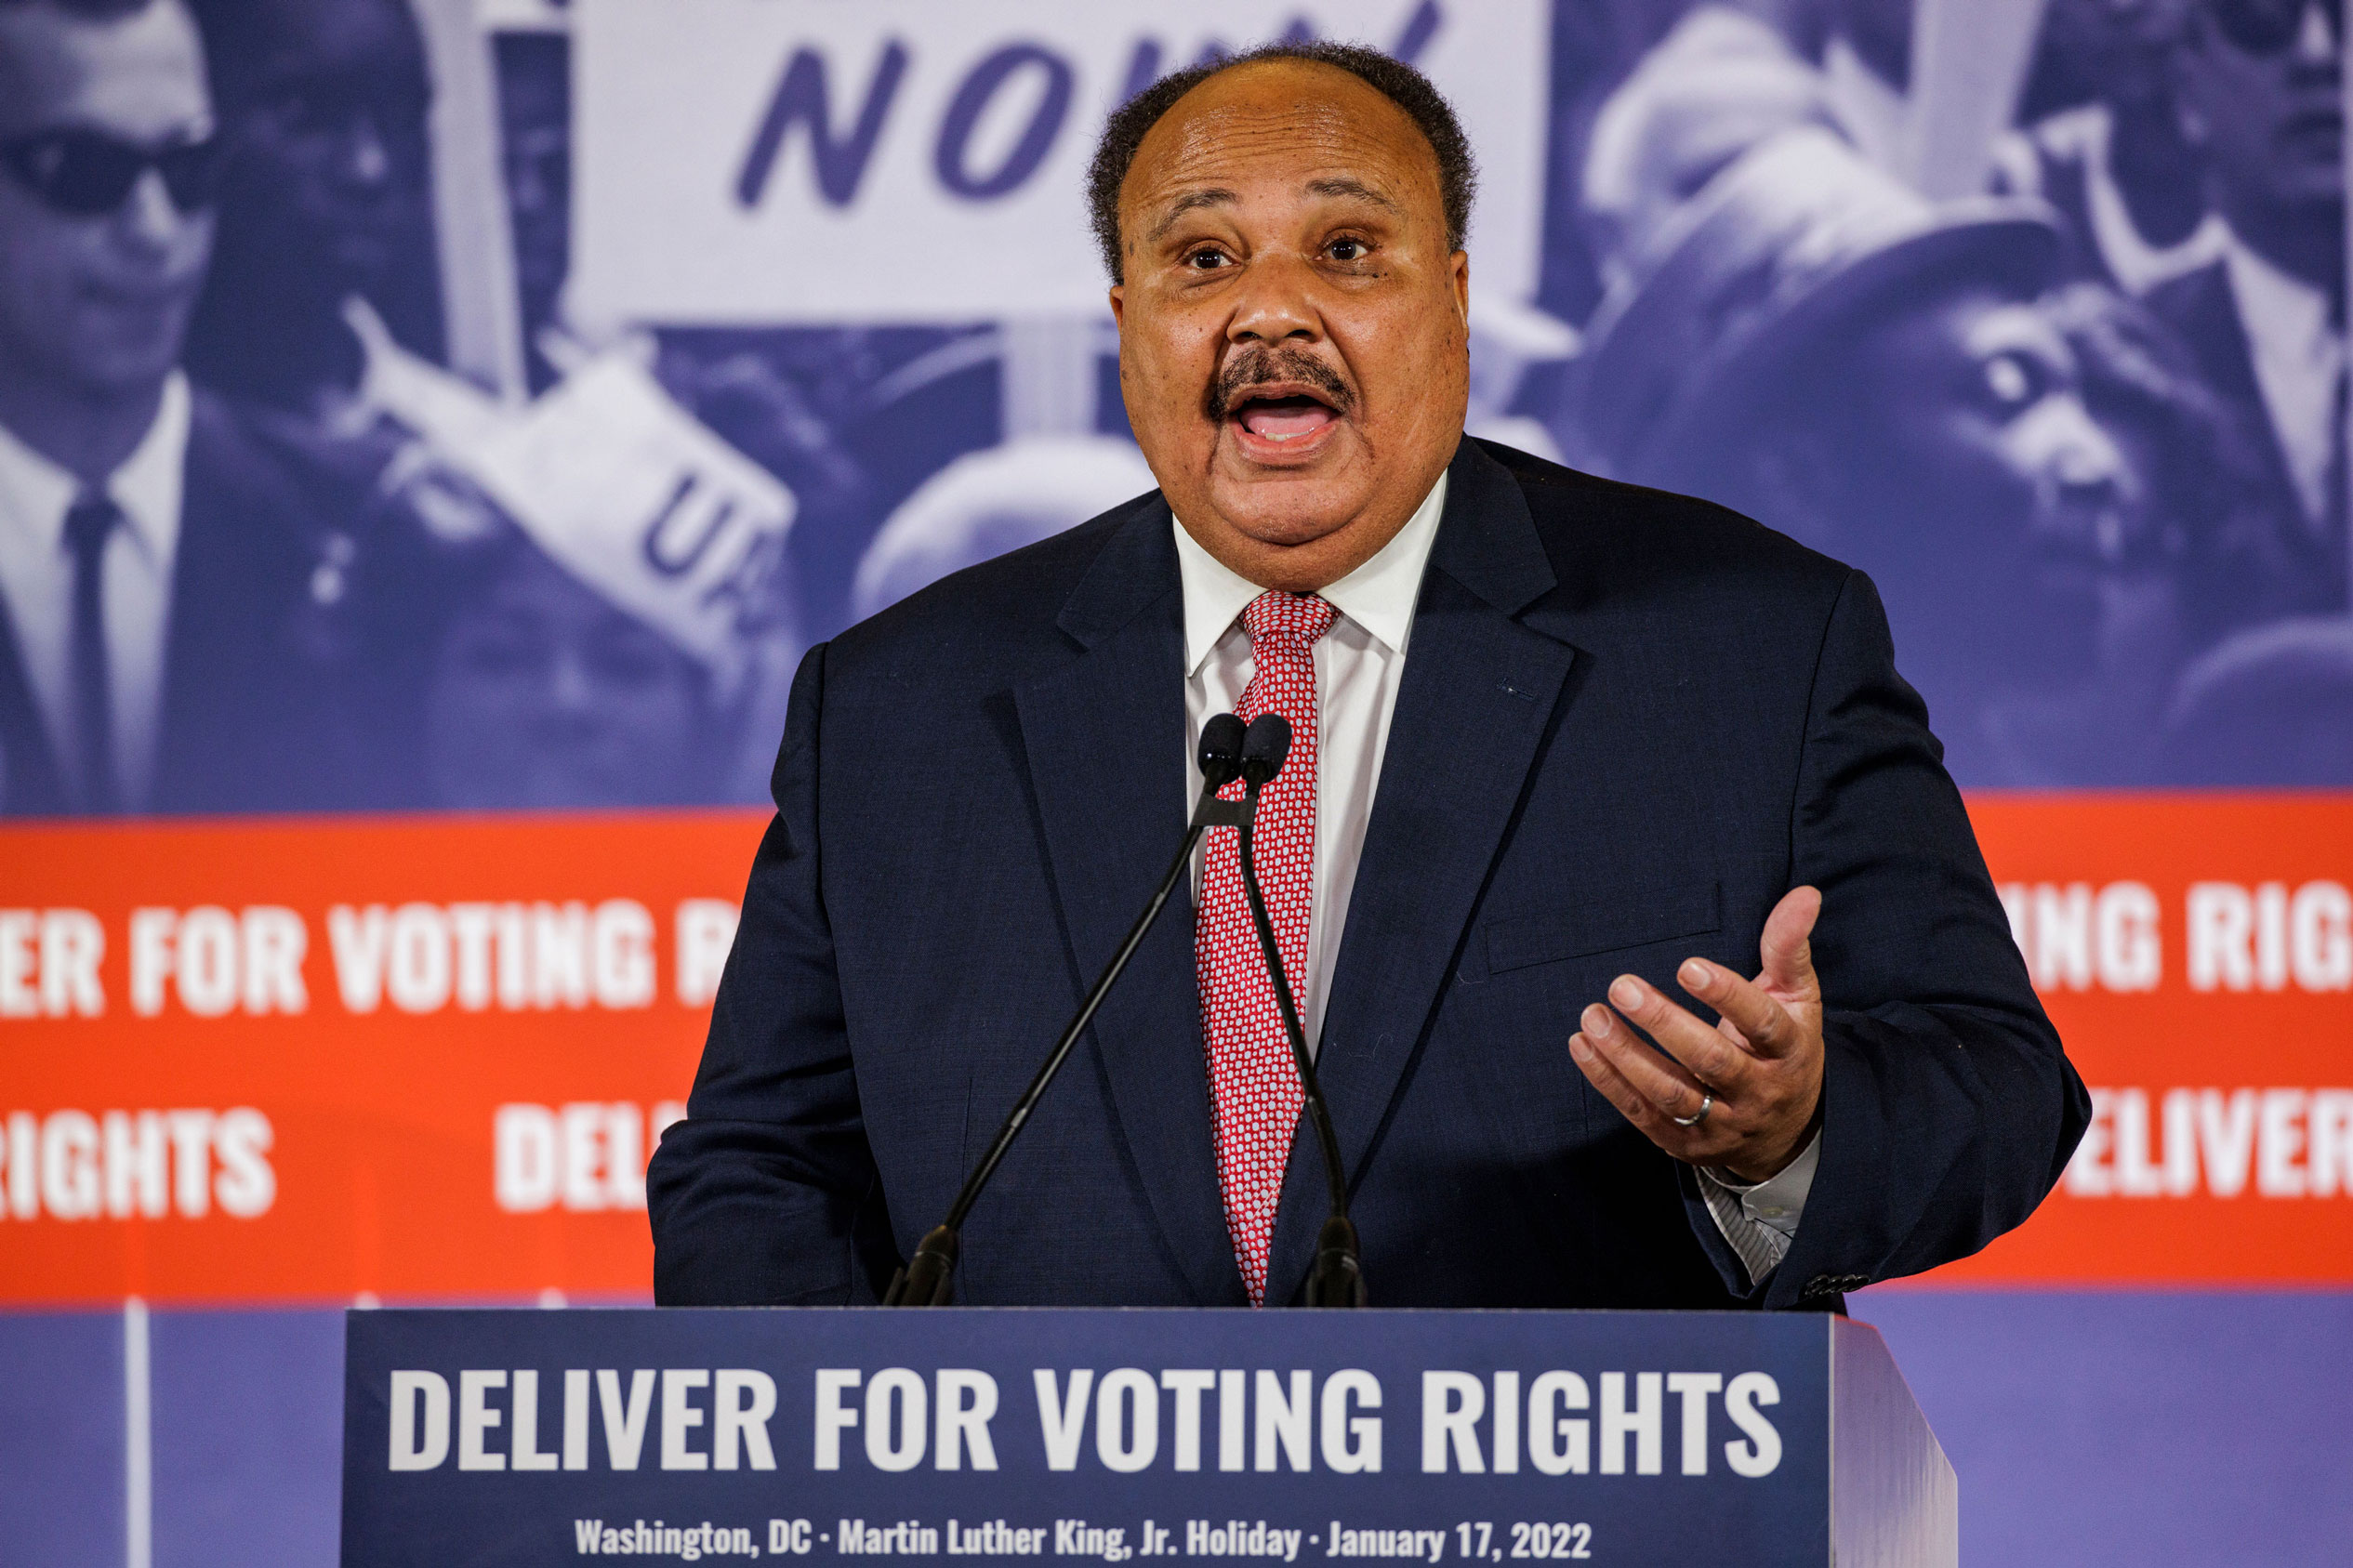 Martin Luther King III, speaks during a press conference with Speaker of the House Nancy Pelosi at Union Station in Washington, DC on Monday.